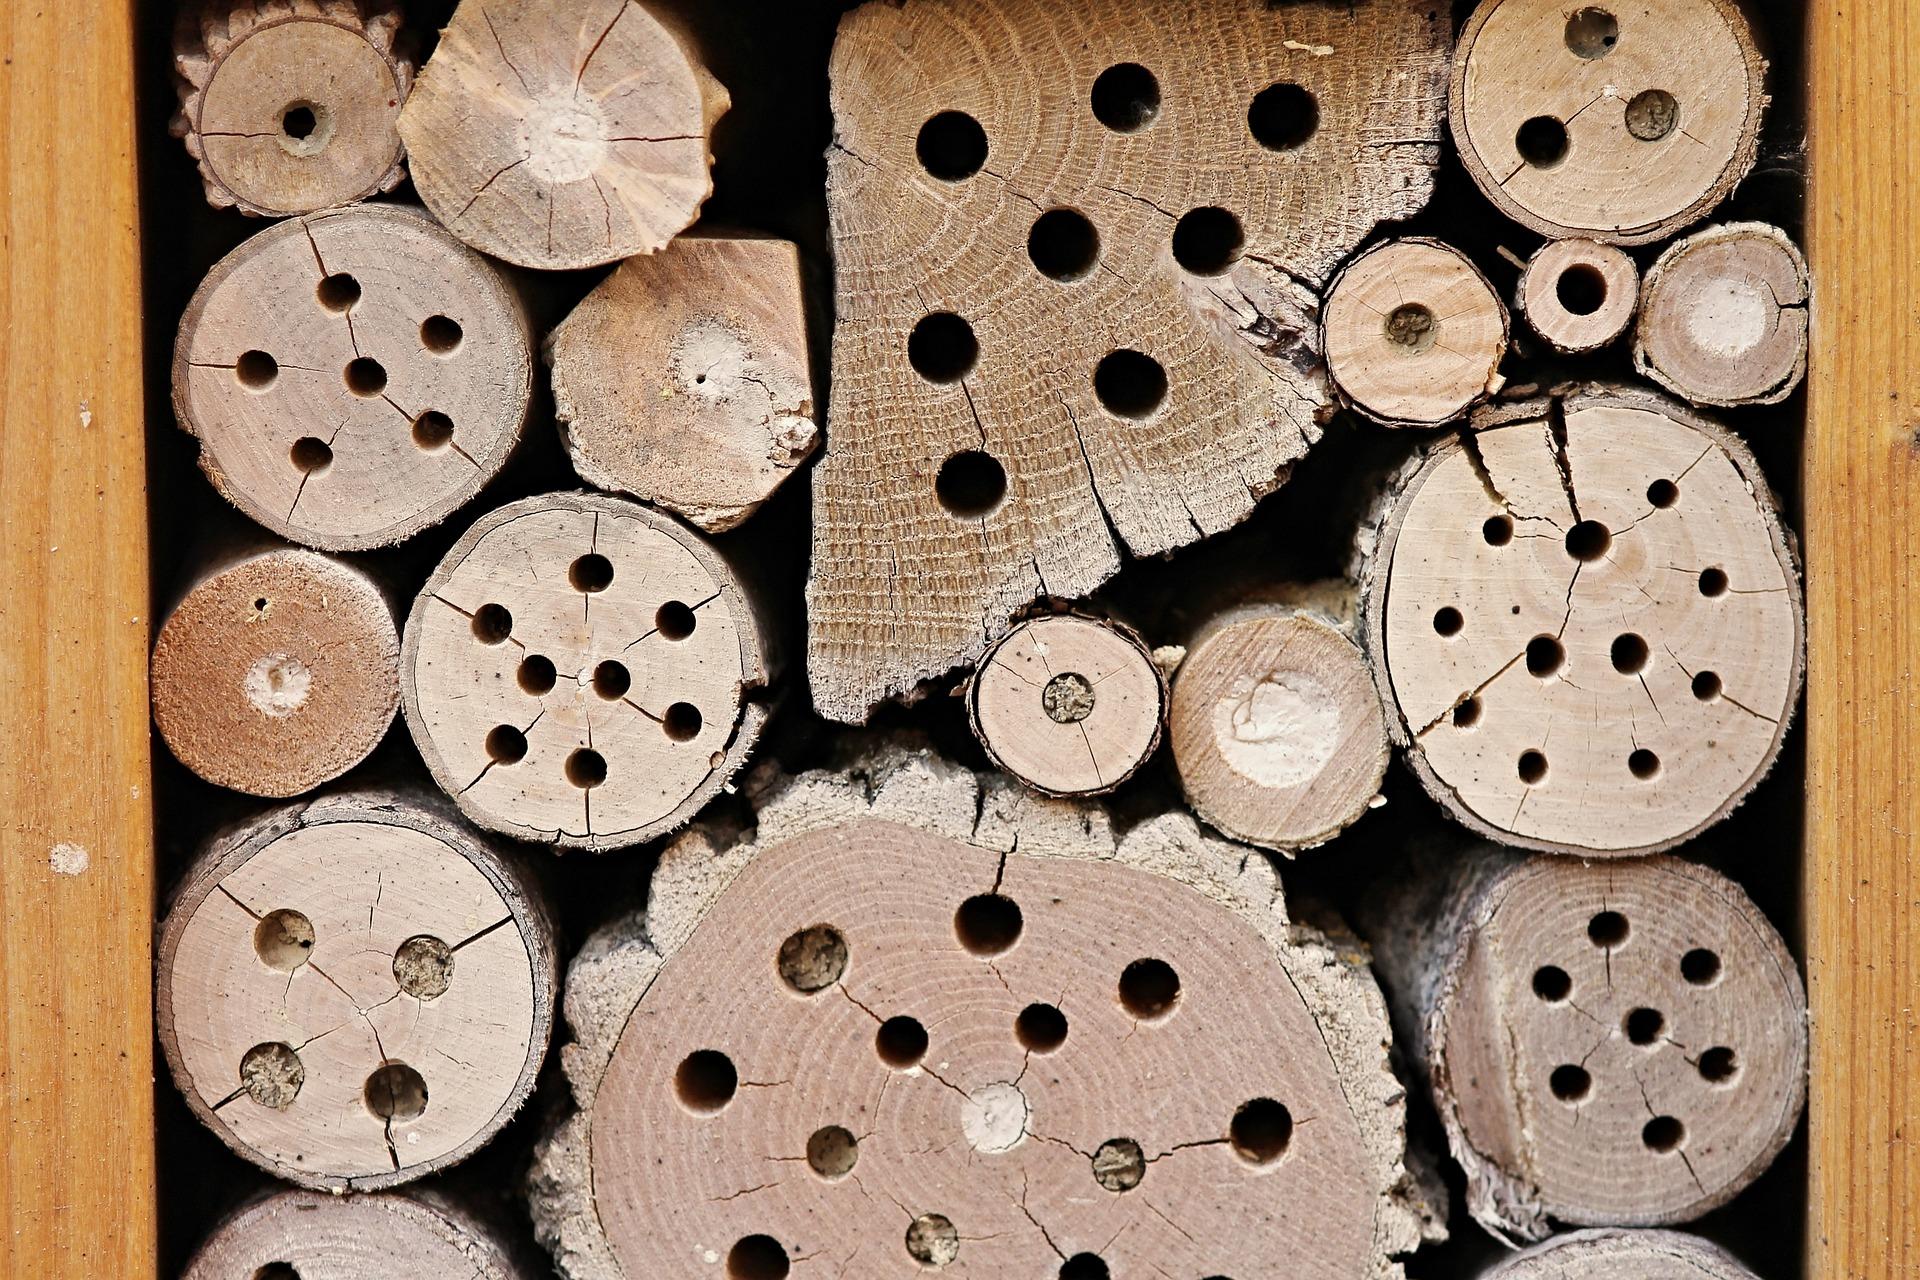 uploads/images/Insect Hotel 2643713_1920